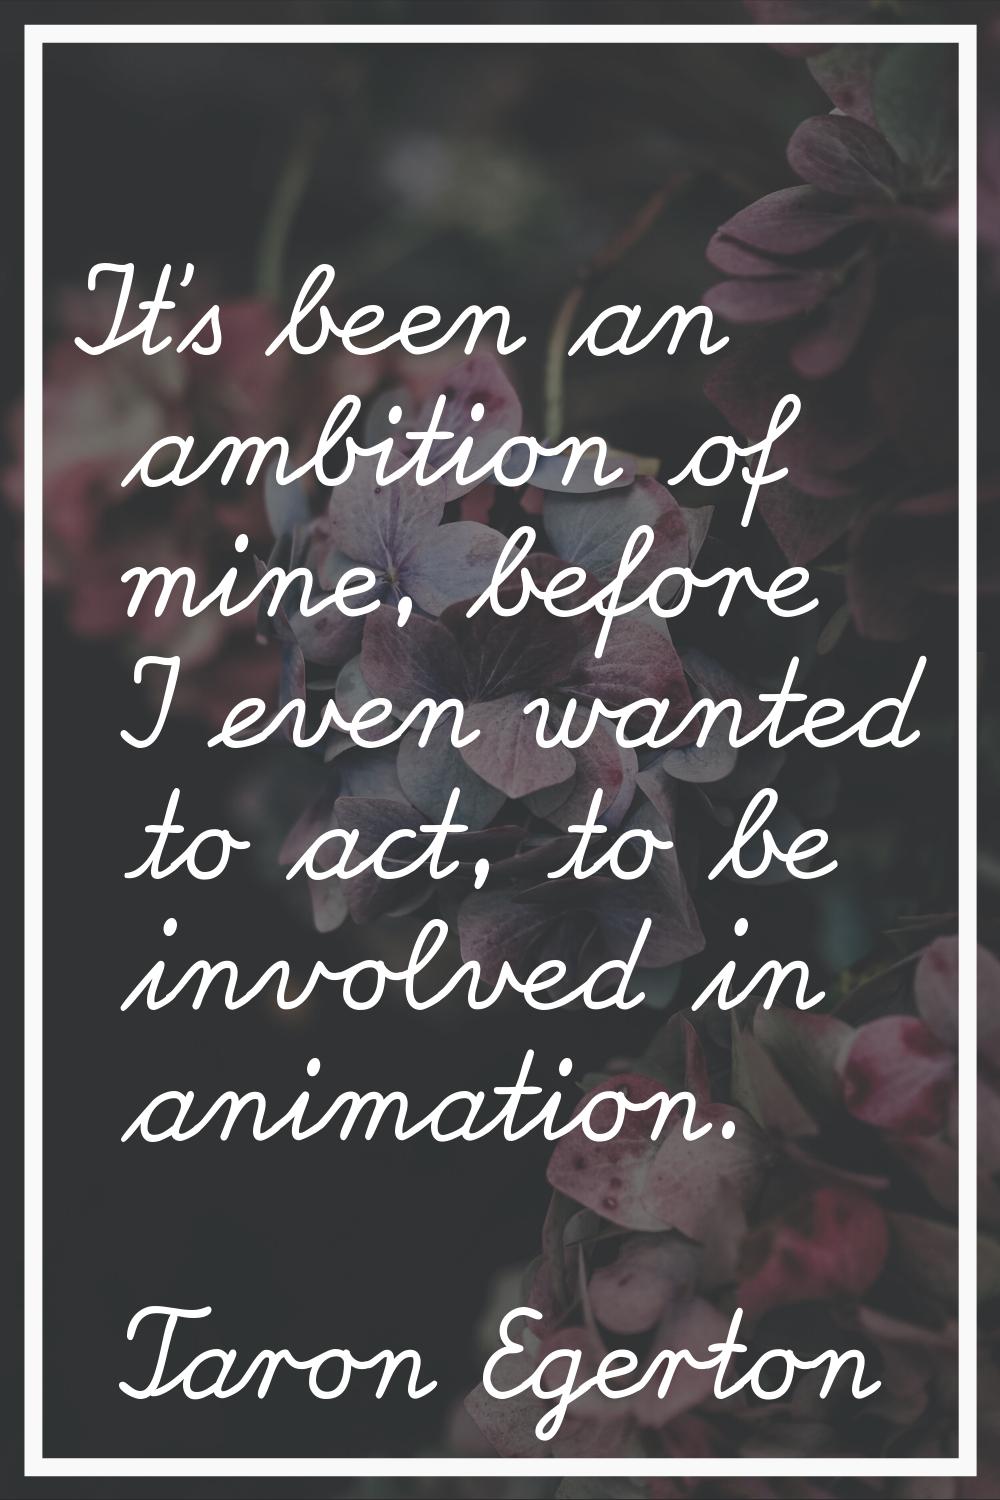 It's been an ambition of mine, before I even wanted to act, to be involved in animation.